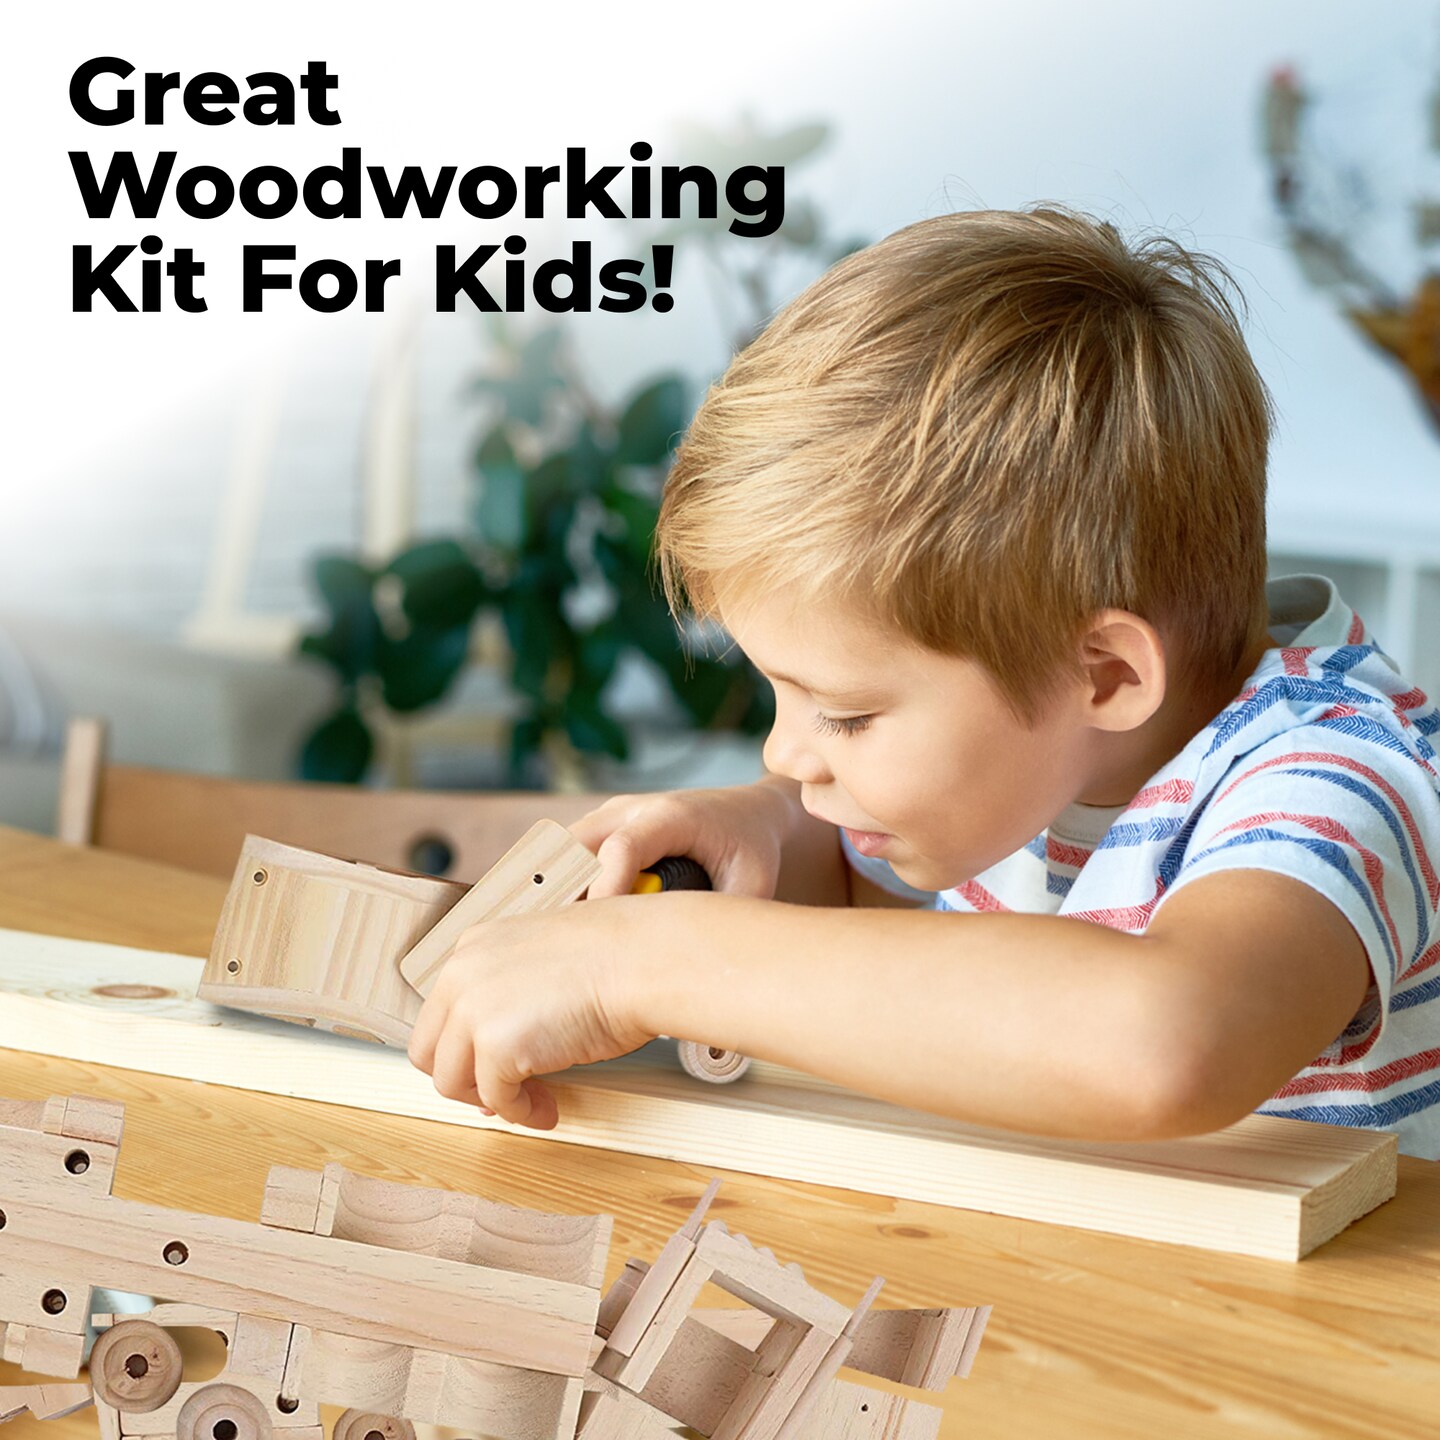 Woodworking with Kids  Woodworking projects for kids, Woodworking kit for  kids, Woodworking kits